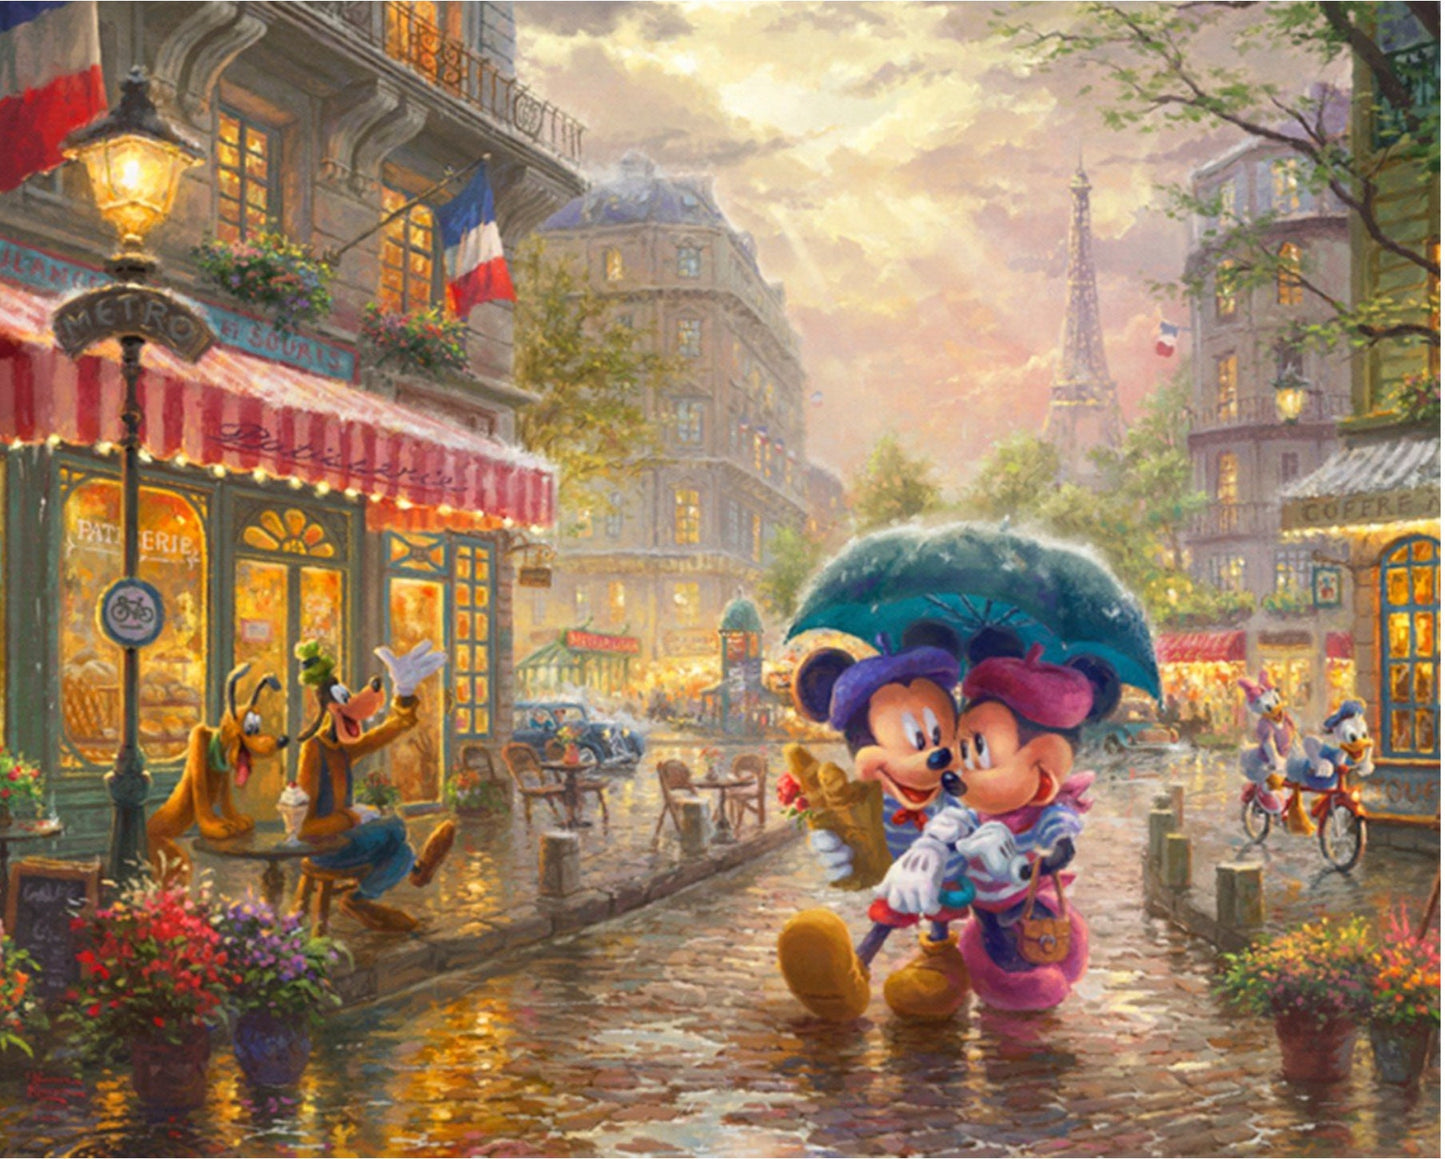 Disney Dreams Collection by Thomas Kinkade Studios 2 DS-2028-9C-1 In Paris Digitally Printed Cotton Woven Fabric